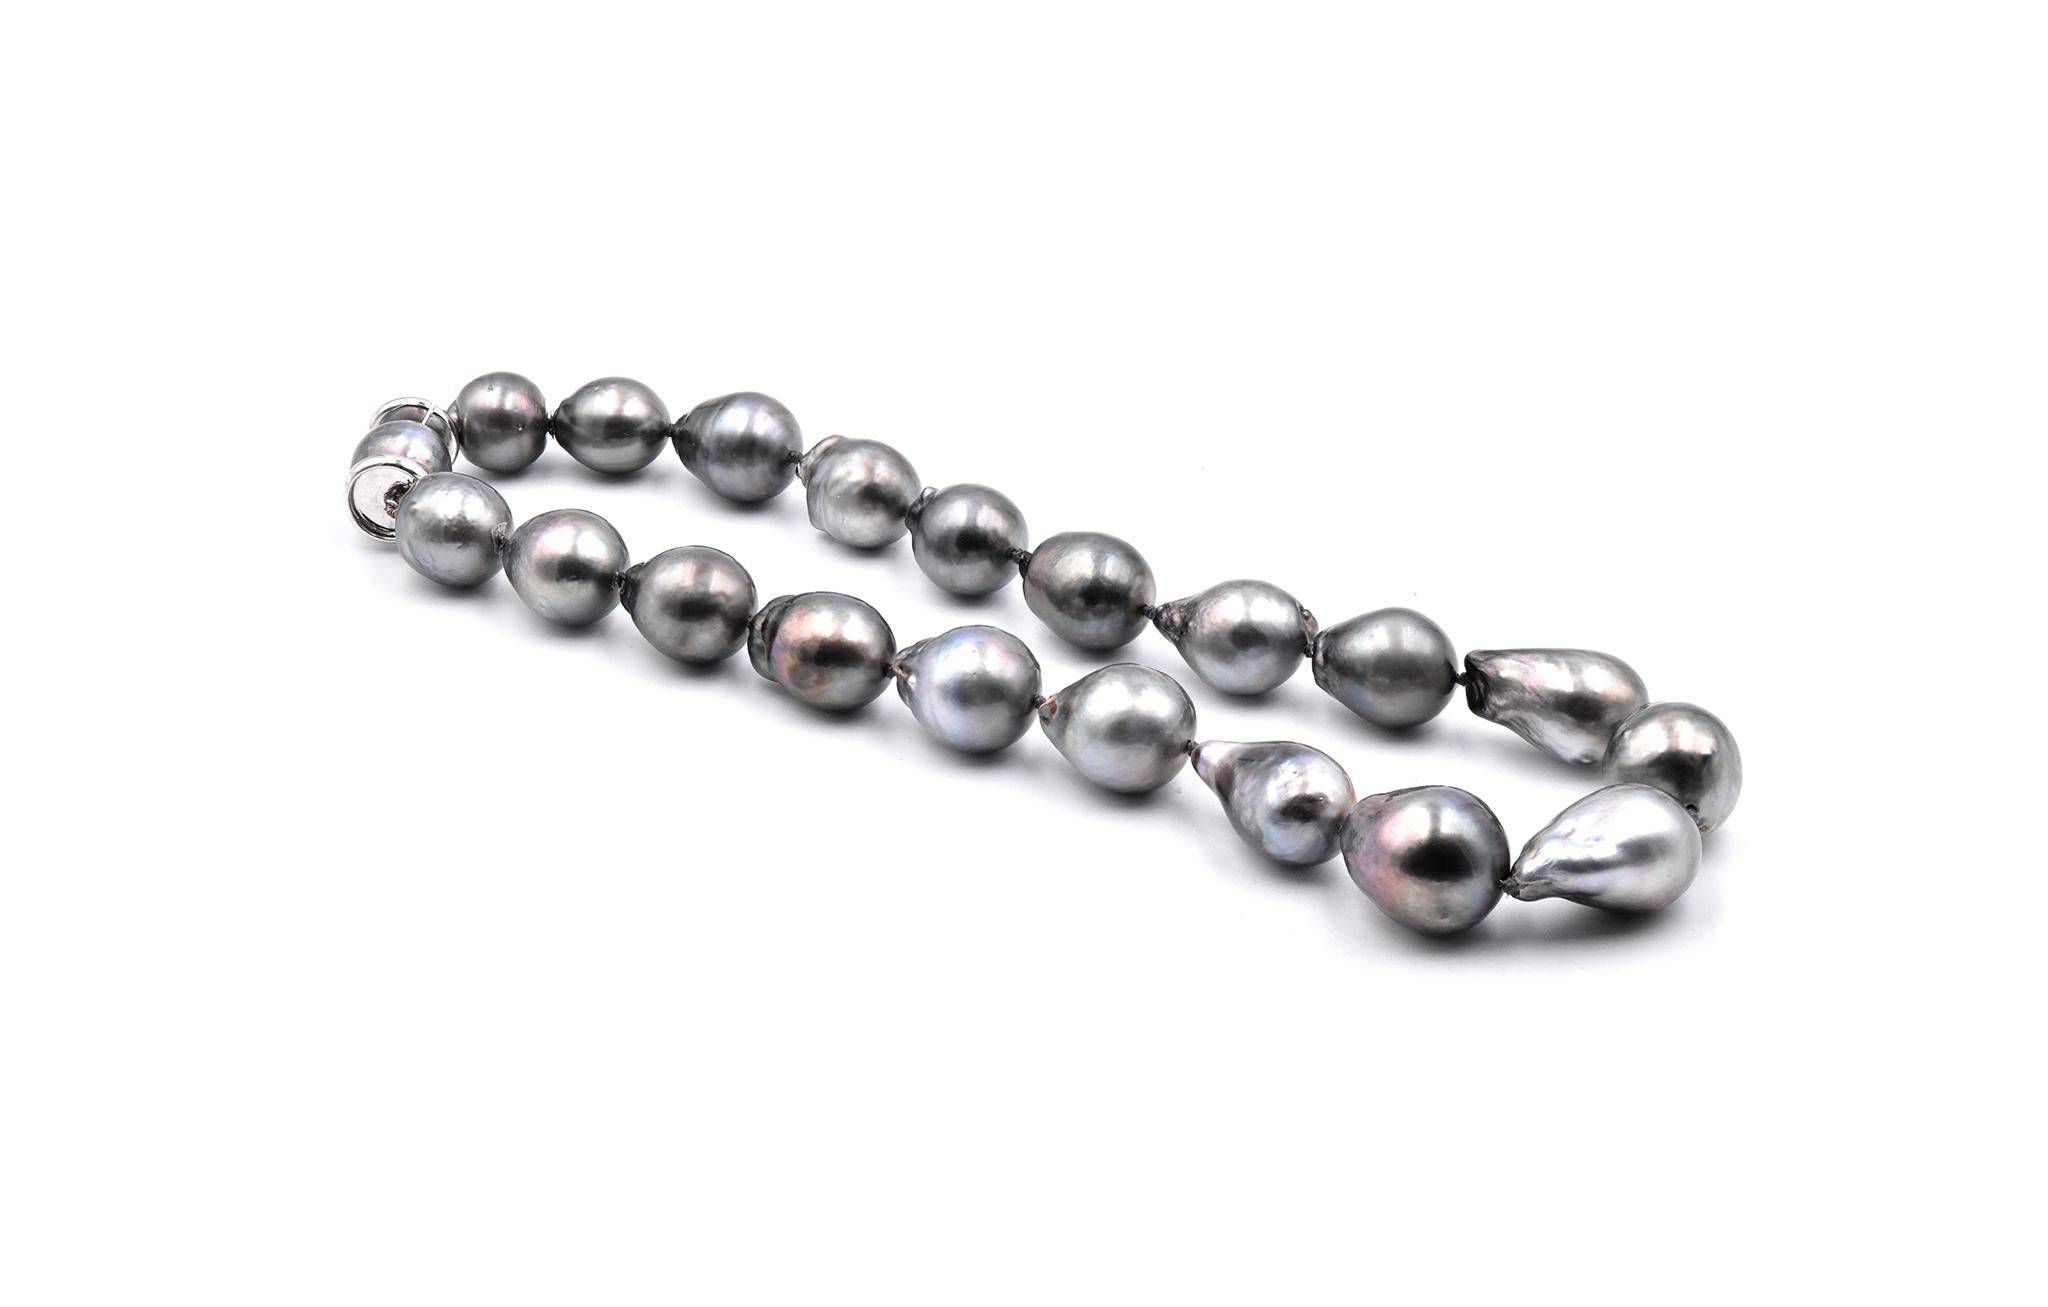 Designer: David Webb
Material: 18K yellow gold
Pearl: 17.5 – 25mm Black Baroque Pearls
Dimensions: necklace measures 17.5-inches in length
Weight: 135.54 grams
